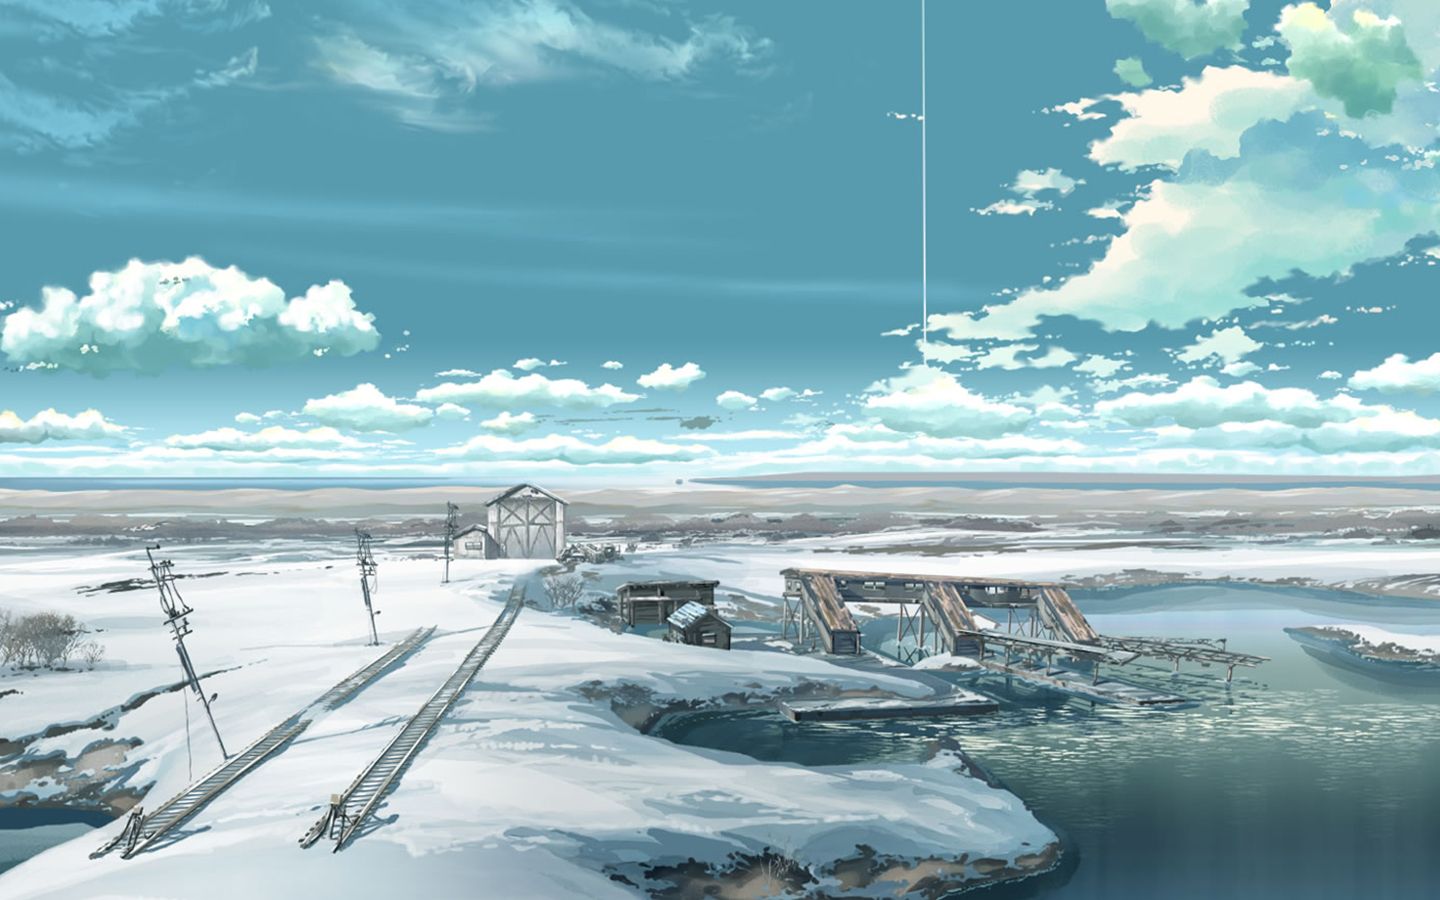 Makoto Shinkai The Place Promised in Our Early Days. Anime scenery, Landscape wallpaper, Scenery